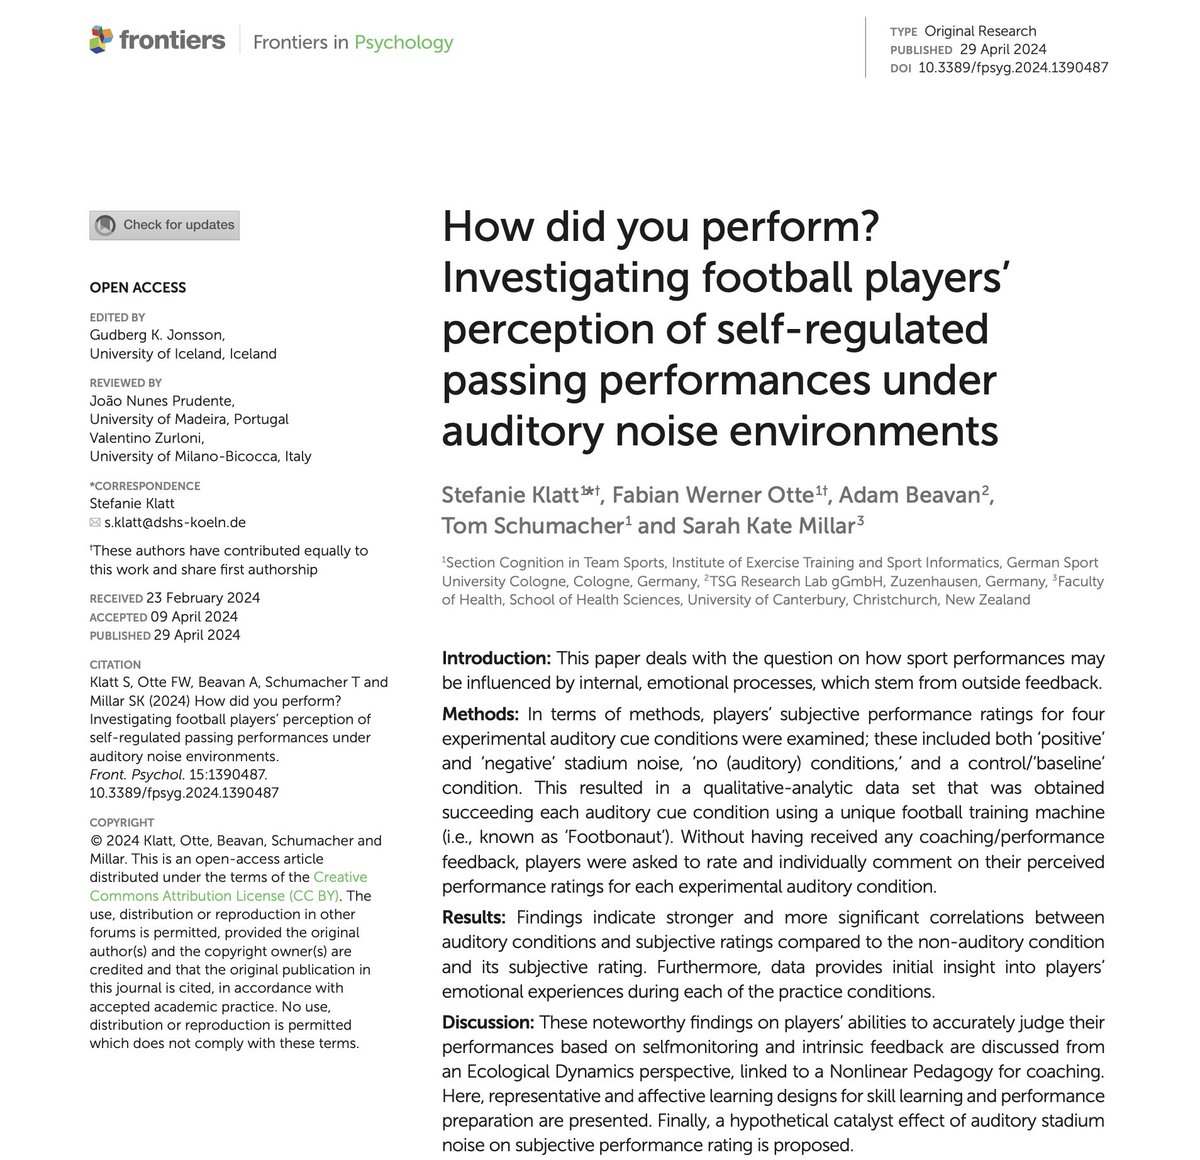 NEW STUDY: What do football players hear, how do they perceive stadium noise and how does it affect their performances? Free paper access here: frontiersin.org/journals/psych… Thanks to all co-authors as always 😊👊